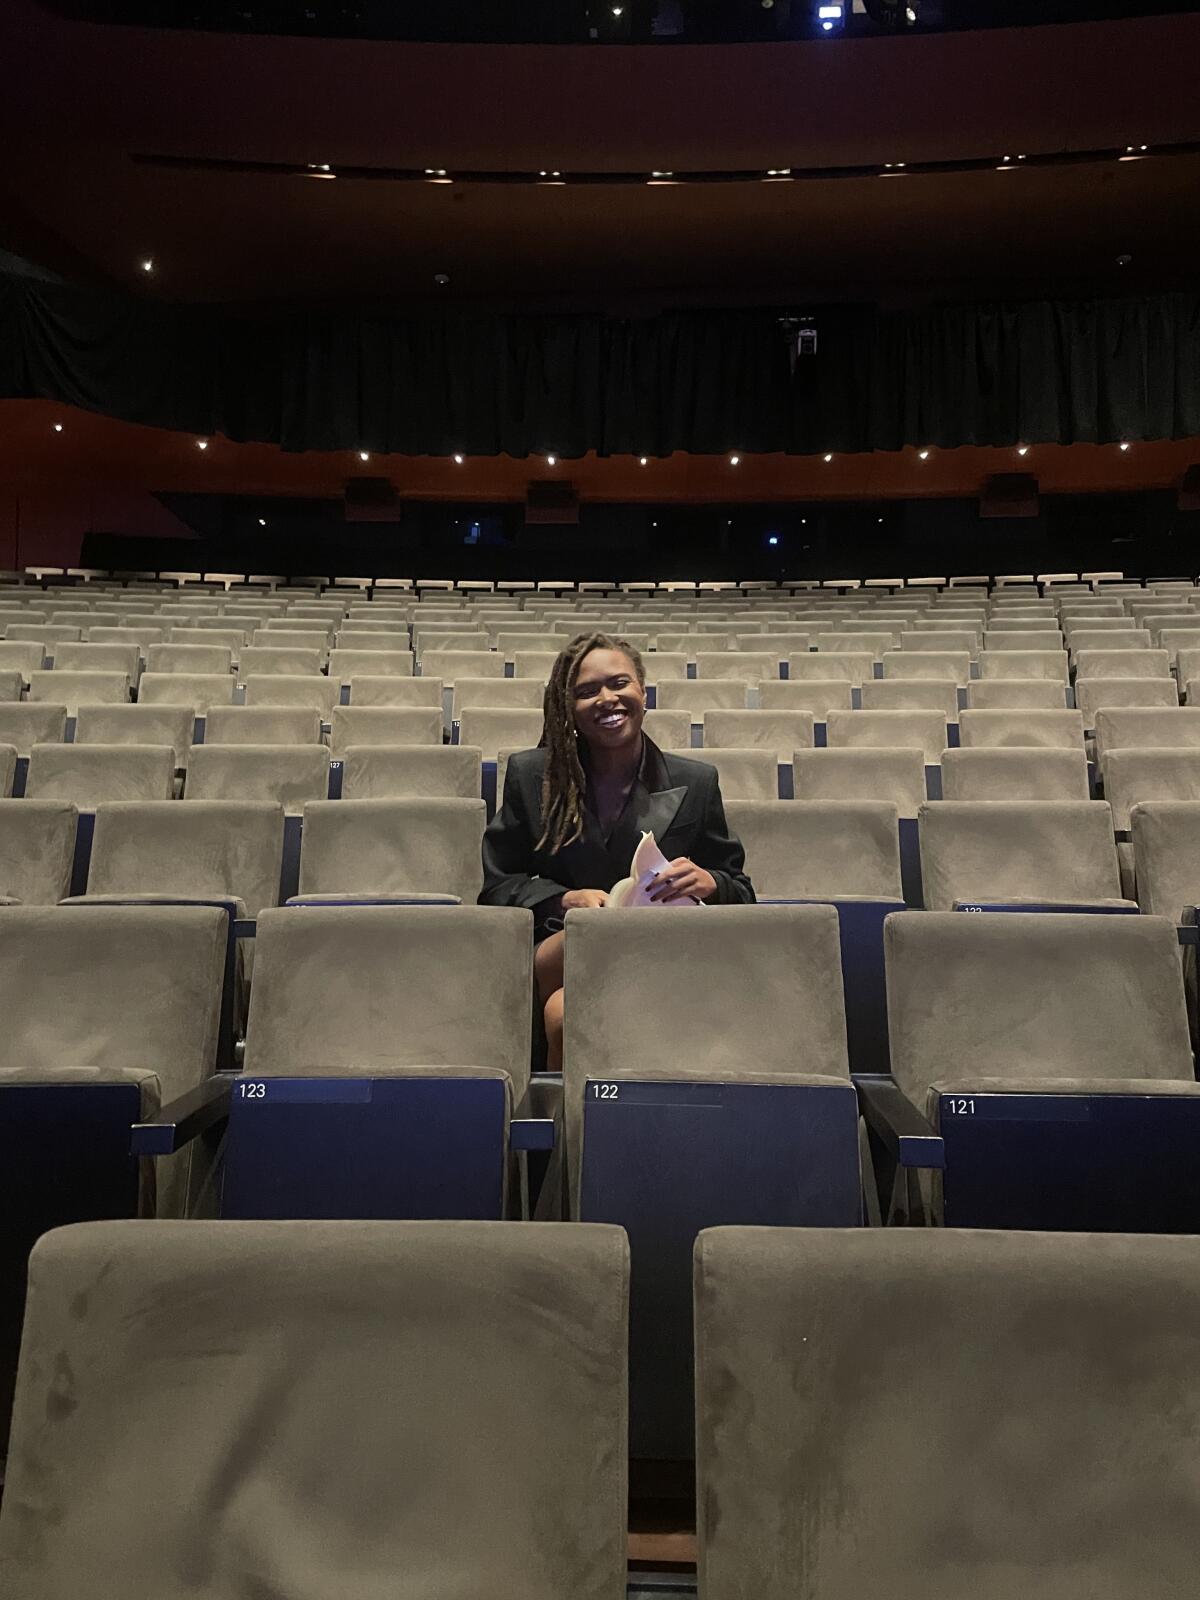 A person sitting along among rows of seats in a theater